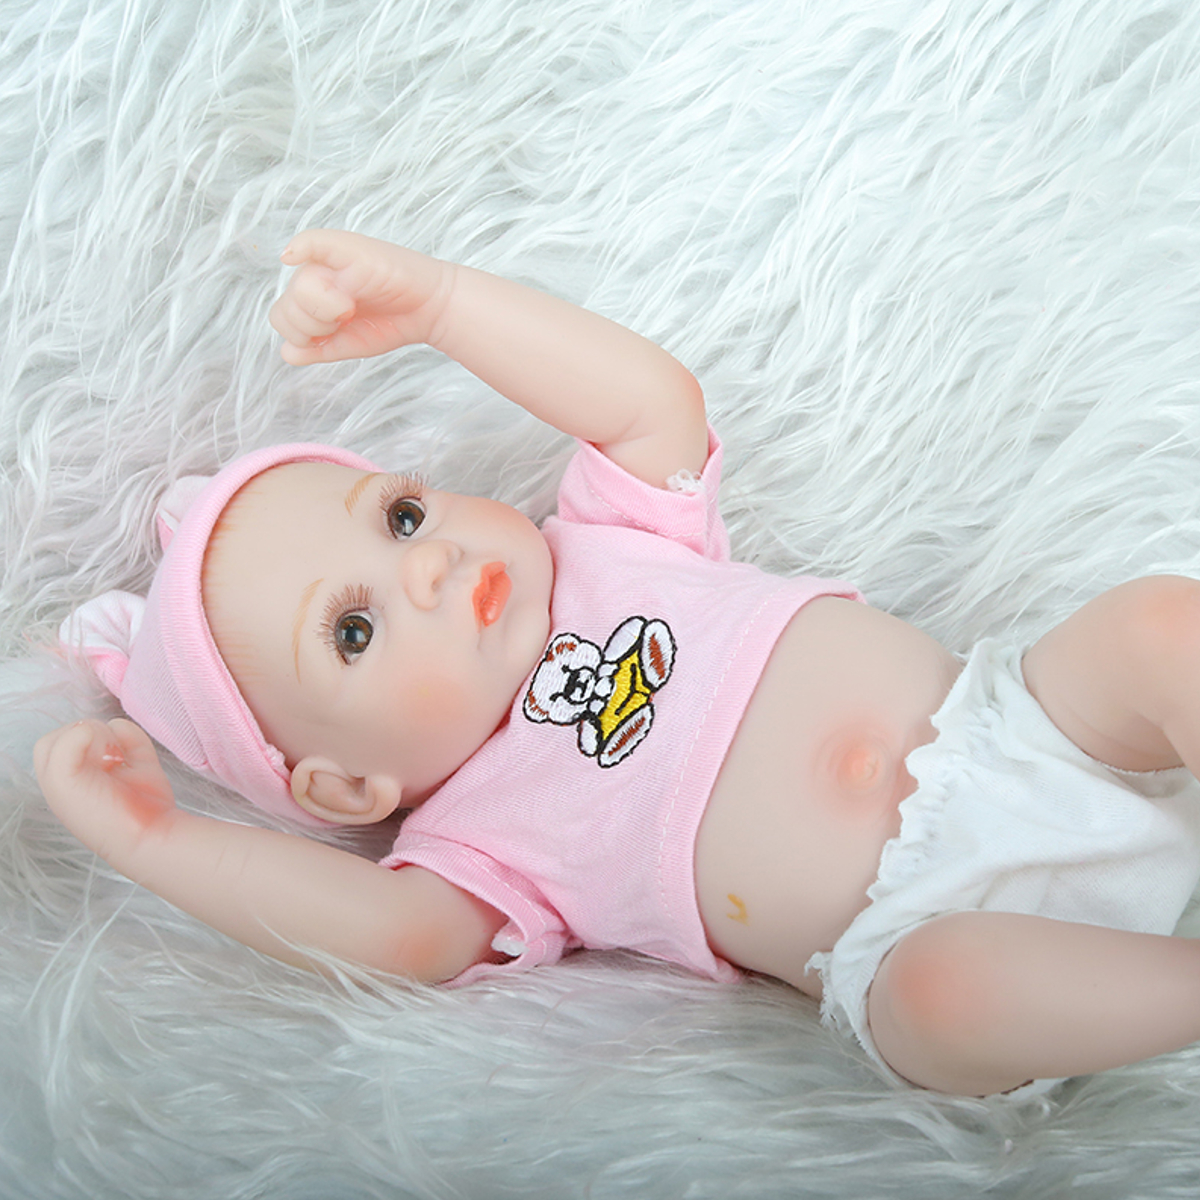 28CM-Silicone-Realistic-Sleeping-Reborns-Lifelike-Newborn-Baby-Doll-Toy-with-Moveable-Head-Arms-And--1817558-9